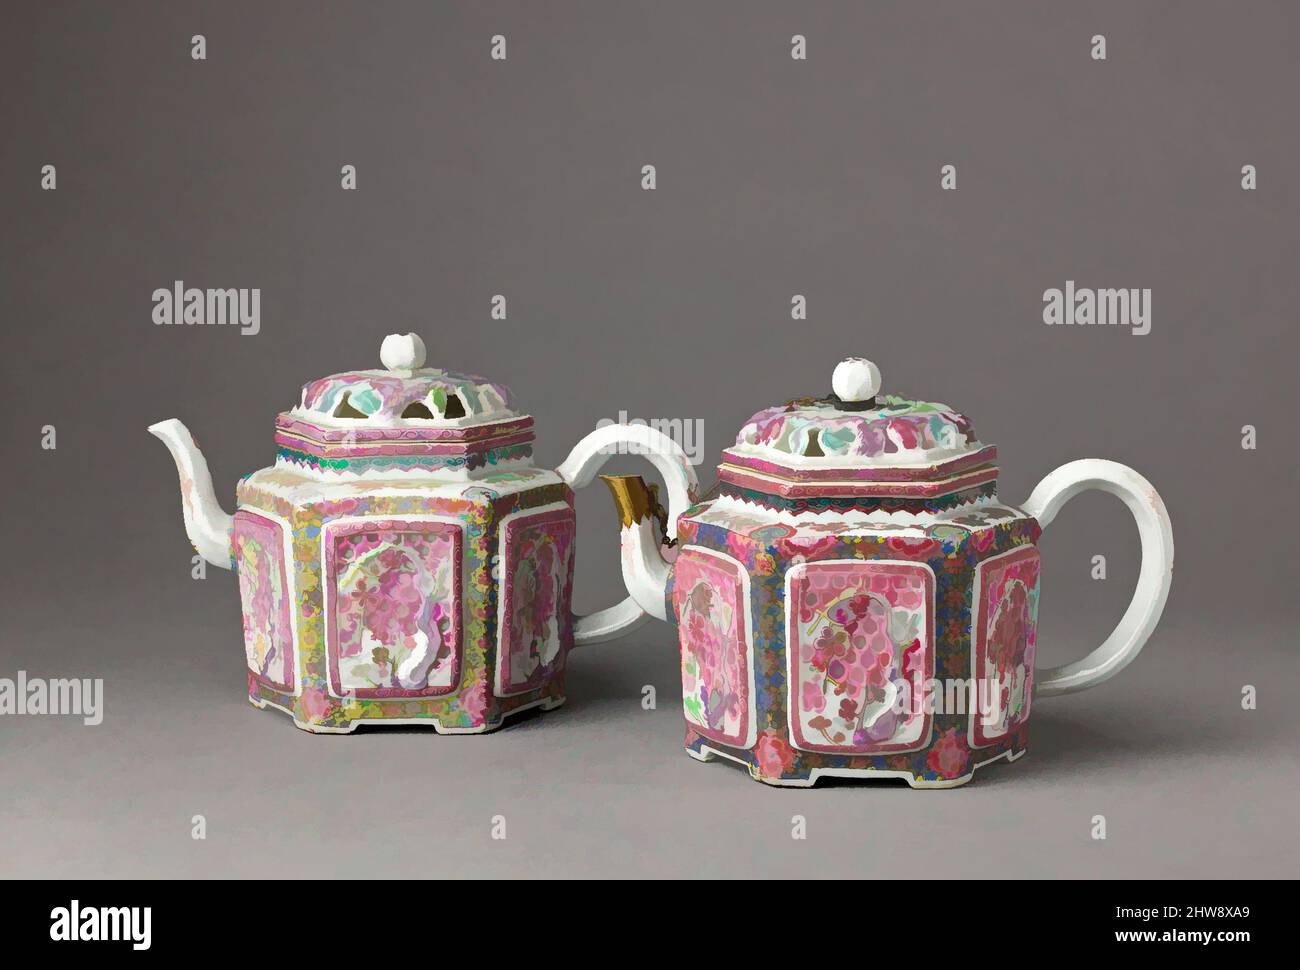 Chinese art antique Handmade reverse painted glass teapot unique gift 